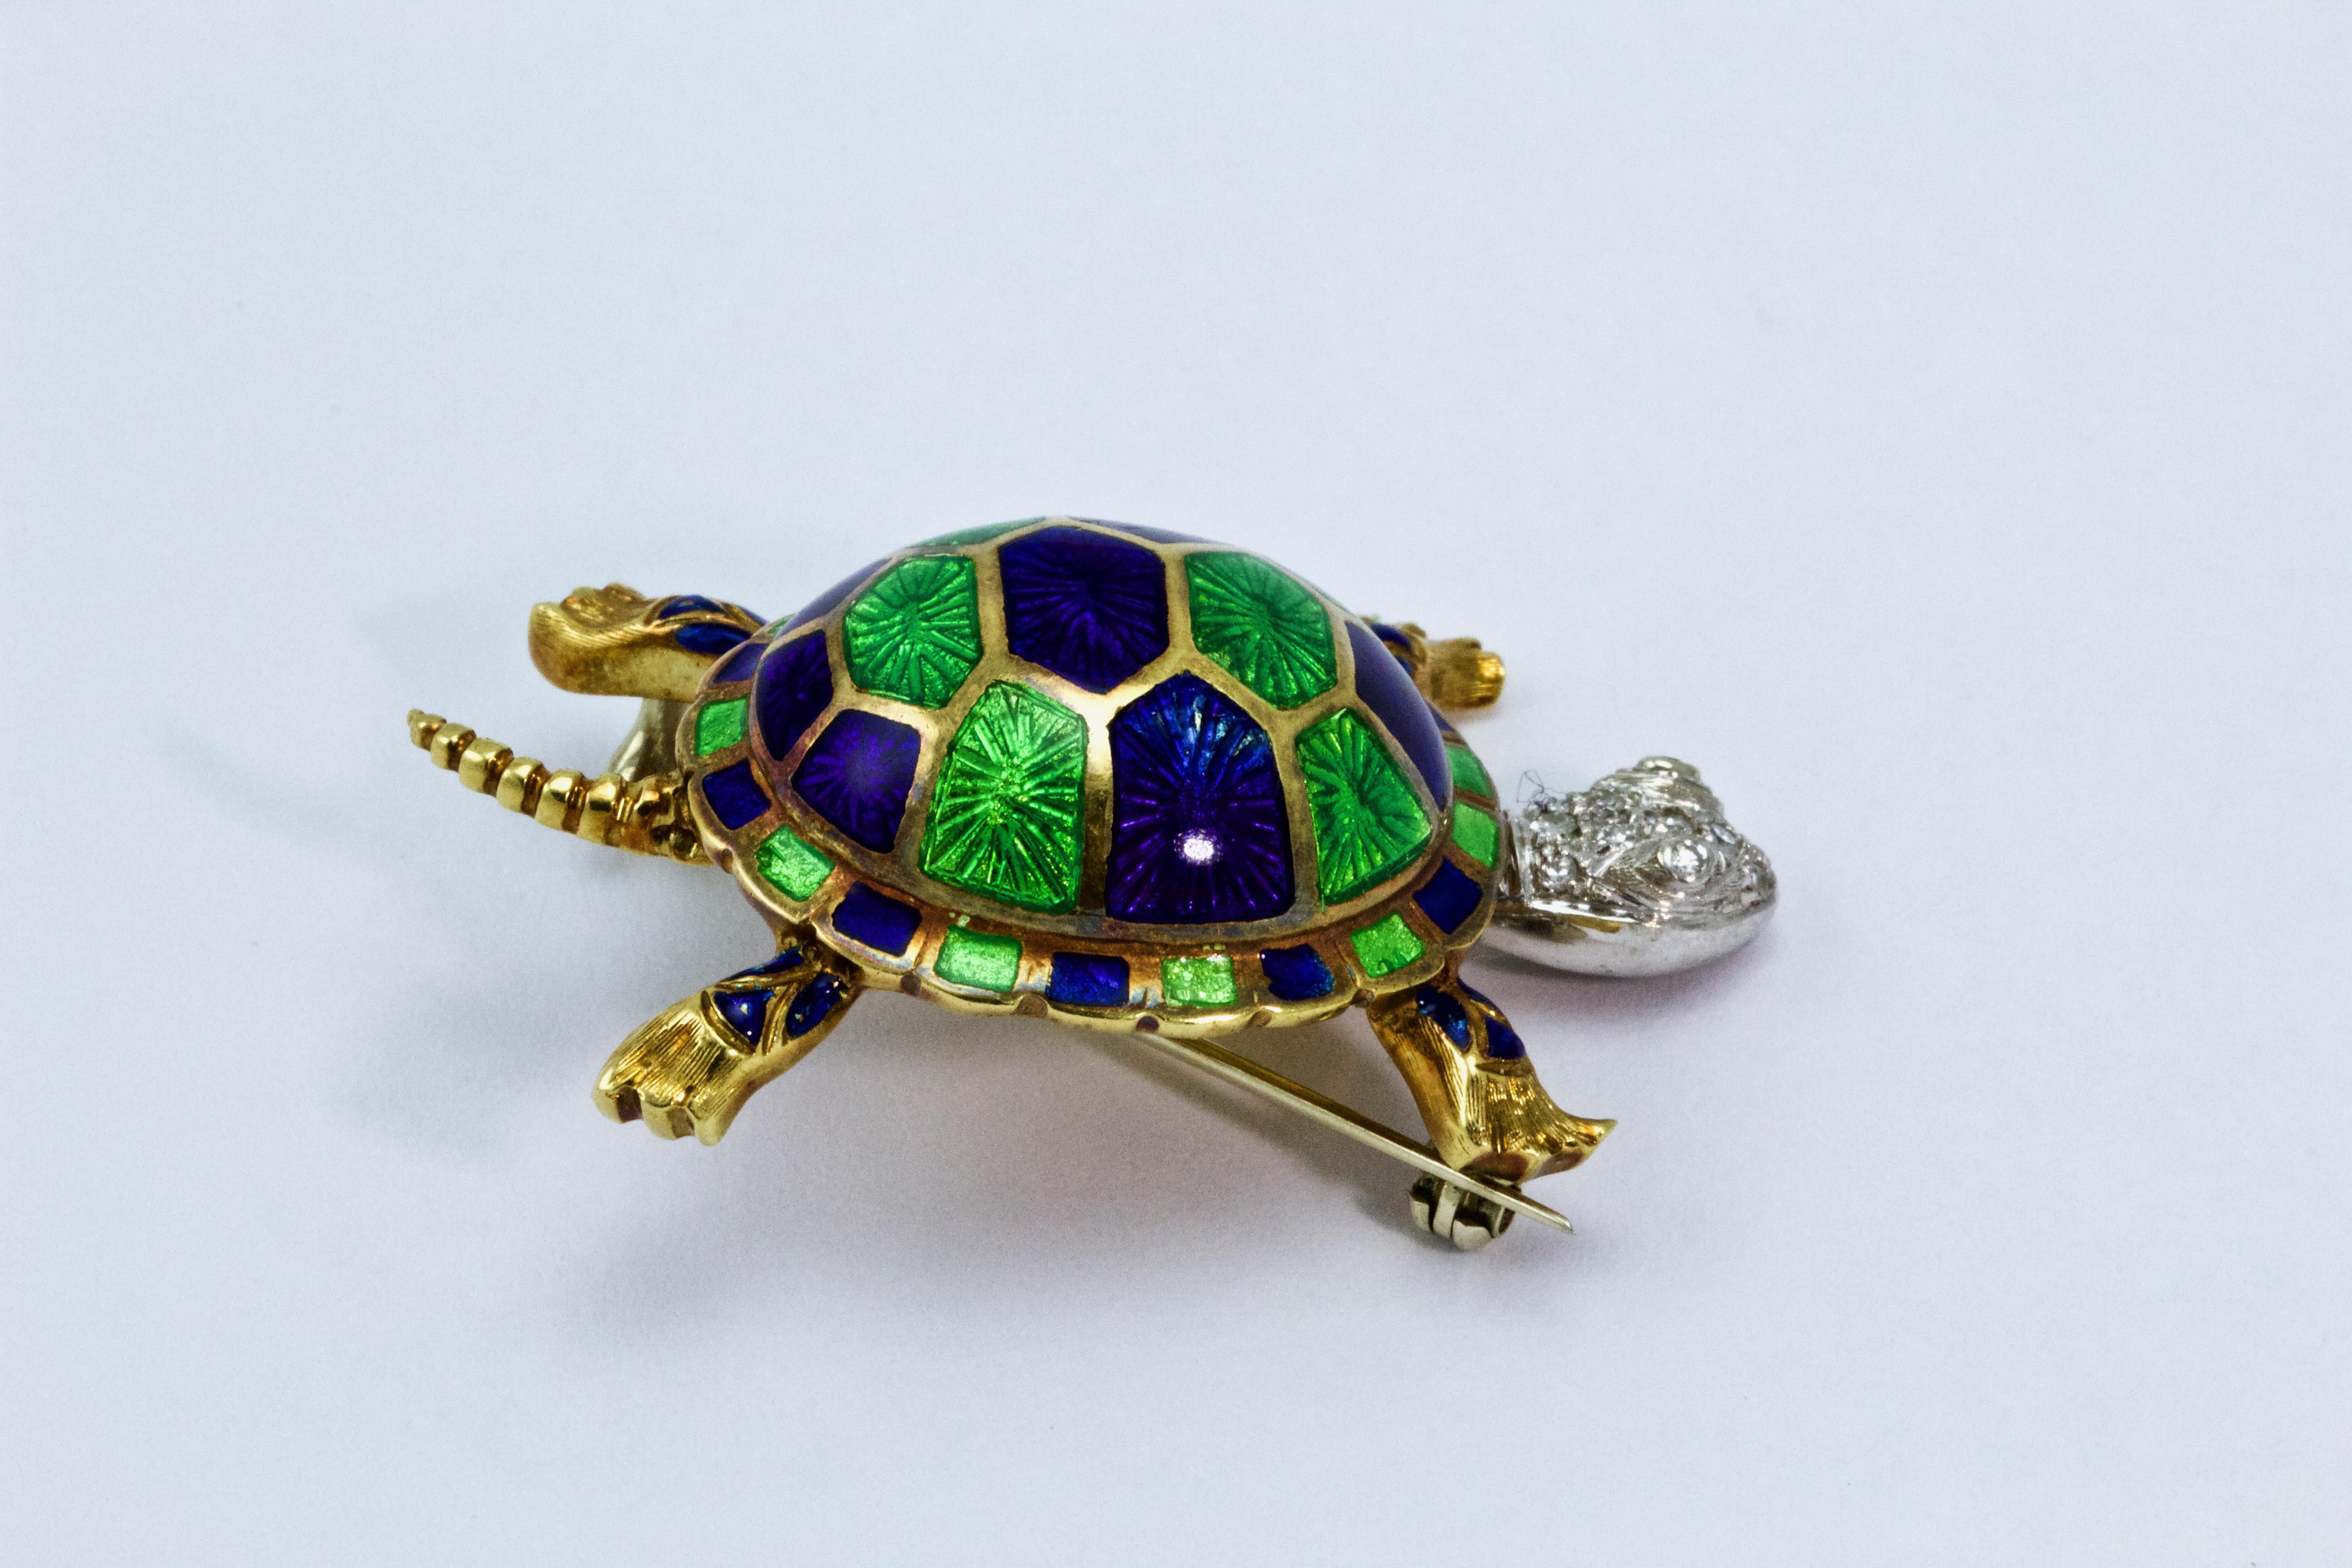 An attractive 18 carat gold brooch, delightfully modelled as a turtle with an enamelled blue and green shell and white gold and diamond head. 

Weight: 17.9 grams.

Size: 26.94 mm x 44.24 mm